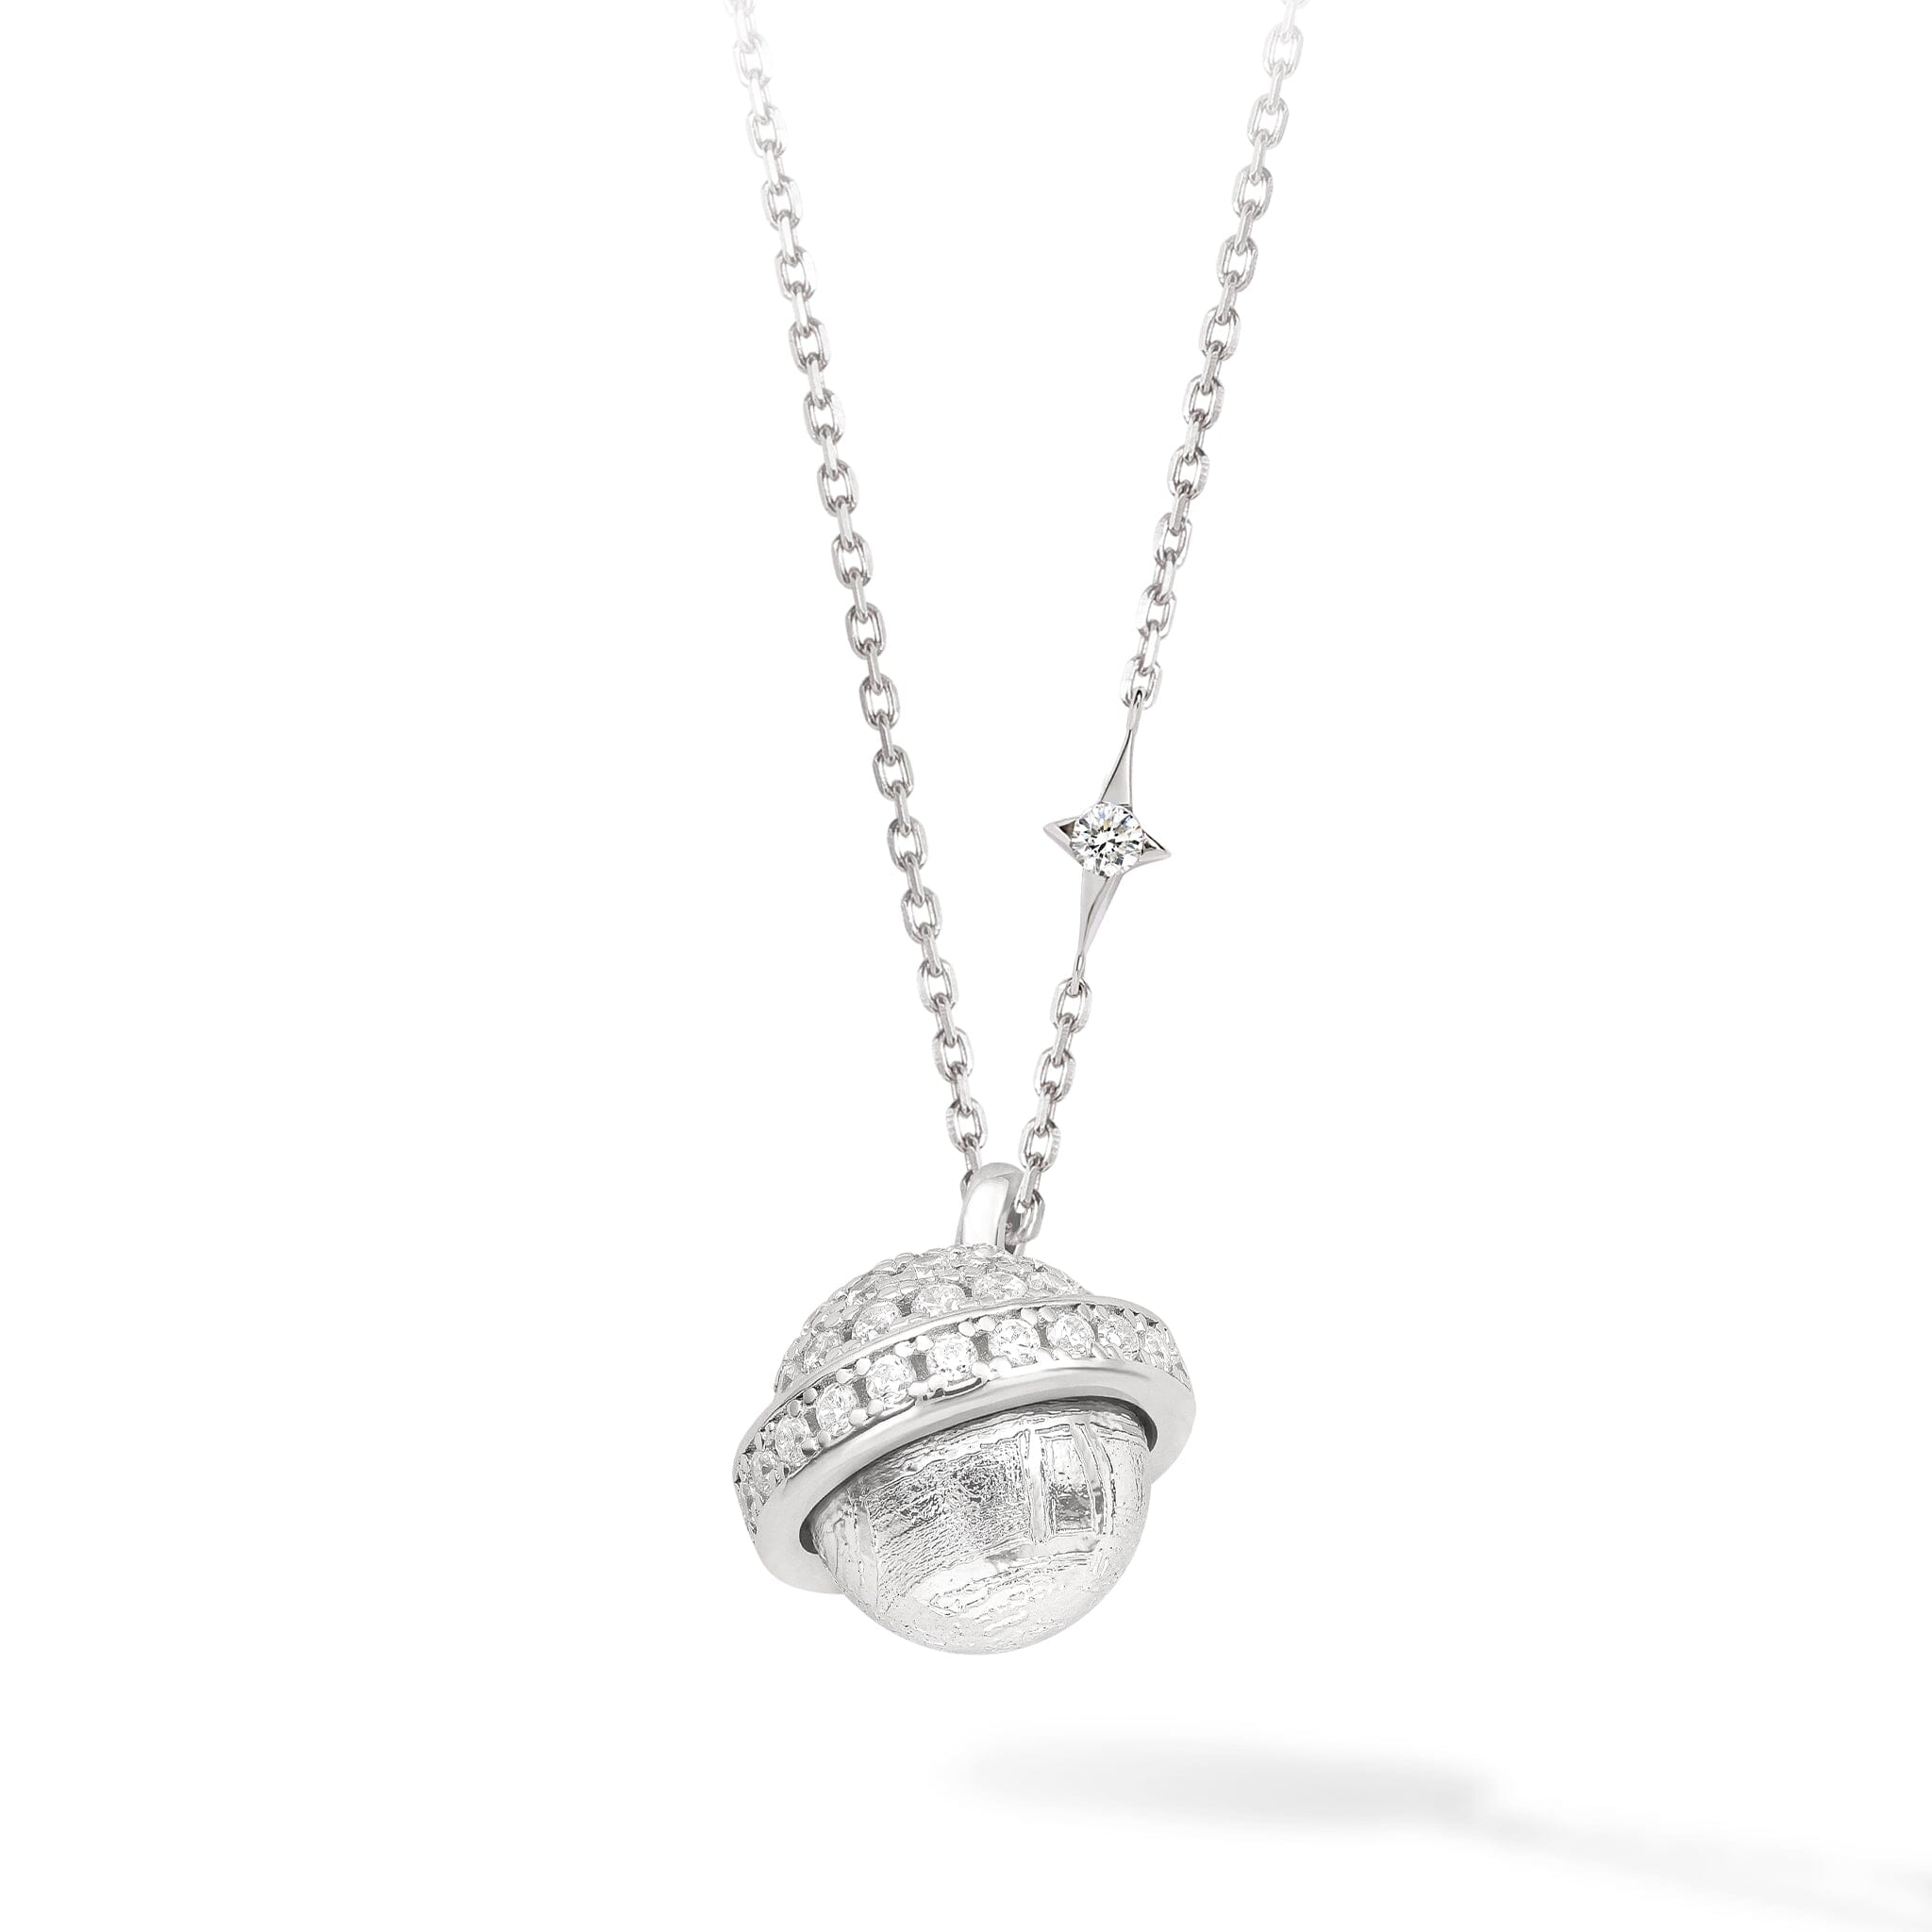 Women's Lunar Silver Necklace with Meteorite Necklaces WAA FASHION GROUP Silver Adjustable 